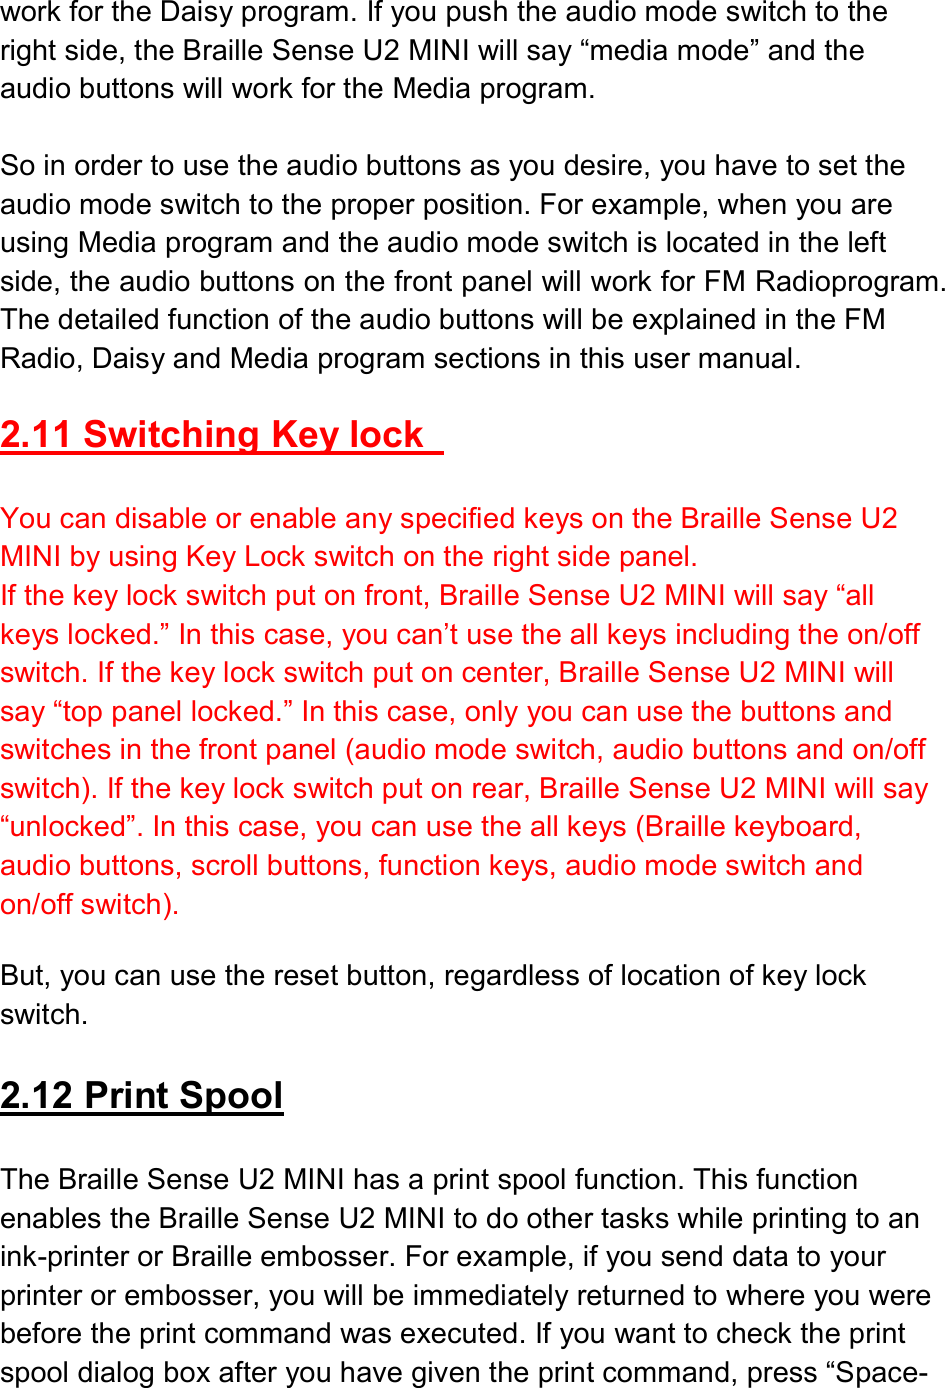  work for the Daisy program. If you push the audio mode switch to the right side, the Braille Sense U2 MINI will say “media mode” and the audio buttons will work for the Media program.  So in order to use the audio buttons as you desire, you have to set the audio mode switch to the proper position. For example, when you are using Media program and the audio mode switch is located in the left side, the audio buttons on the front panel will work for FM Radioprogram. The detailed function of the audio buttons will be explained in the FM Radio, Daisy and Media program sections in this user manual.  2.11 Switching Key lock    You can disable or enable any specified keys on the Braille Sense U2 MINI by using Key Lock switch on the right side panel. If the key lock switch put on front, Braille Sense U2 MINI will say “all keys locked.” In this case, you can’t use the all keys including the on/off switch. If the key lock switch put on center, Braille Sense U2 MINI will say “top panel locked.” In this case, only you can use the buttons and switches in the front panel (audio mode switch, audio buttons and on/off switch). If the key lock switch put on rear, Braille Sense U2 MINI will say “unlocked”. In this case, you can use the all keys (Braille keyboard, audio buttons, scroll buttons, function keys, audio mode switch and on/off switch).  But, you can use the reset button, regardless of location of key lock switch.  2.12 Print Spool  The Braille Sense U2 MINI has a print spool function. This function enables the Braille Sense U2 MINI to do other tasks while printing to an ink-printer or Braille embosser. For example, if you send data to your printer or embosser, you will be immediately returned to where you were before the print command was executed. If you want to check the print spool dialog box after you have given the print command, press “Space-